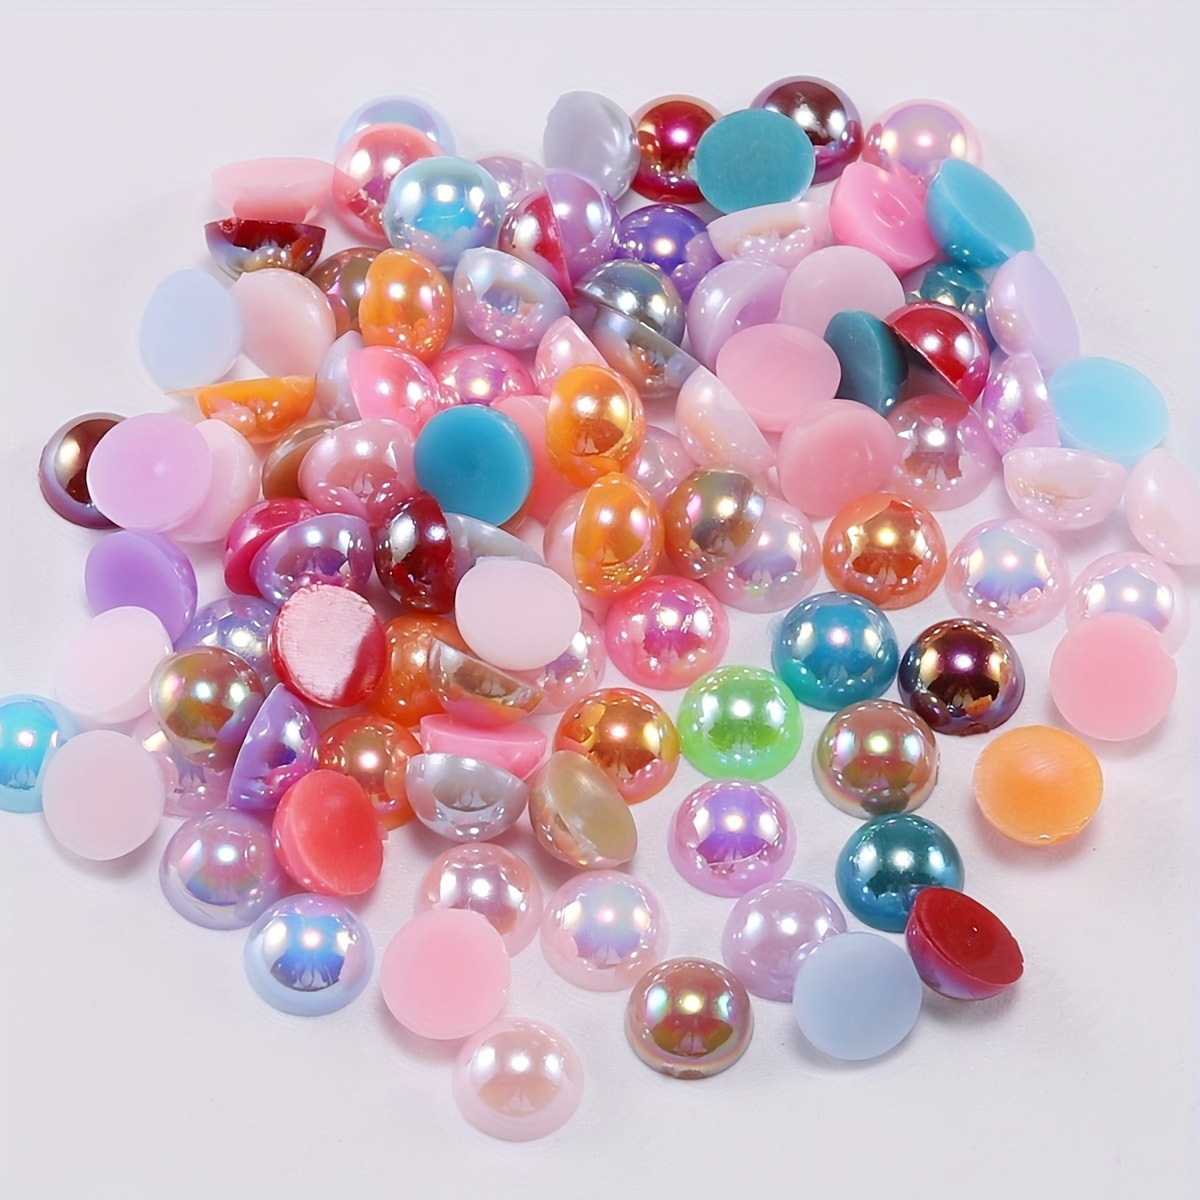  TOAOB 13000pcs Black Flat Back Pearl Beads Half Round Imitation  Pearls 2mm to 10mm Assorted Sizes Plastic Gem Pearls for Crafts Nails Phone  Shoes Making DIY Crafting Accessory : Arts, Crafts